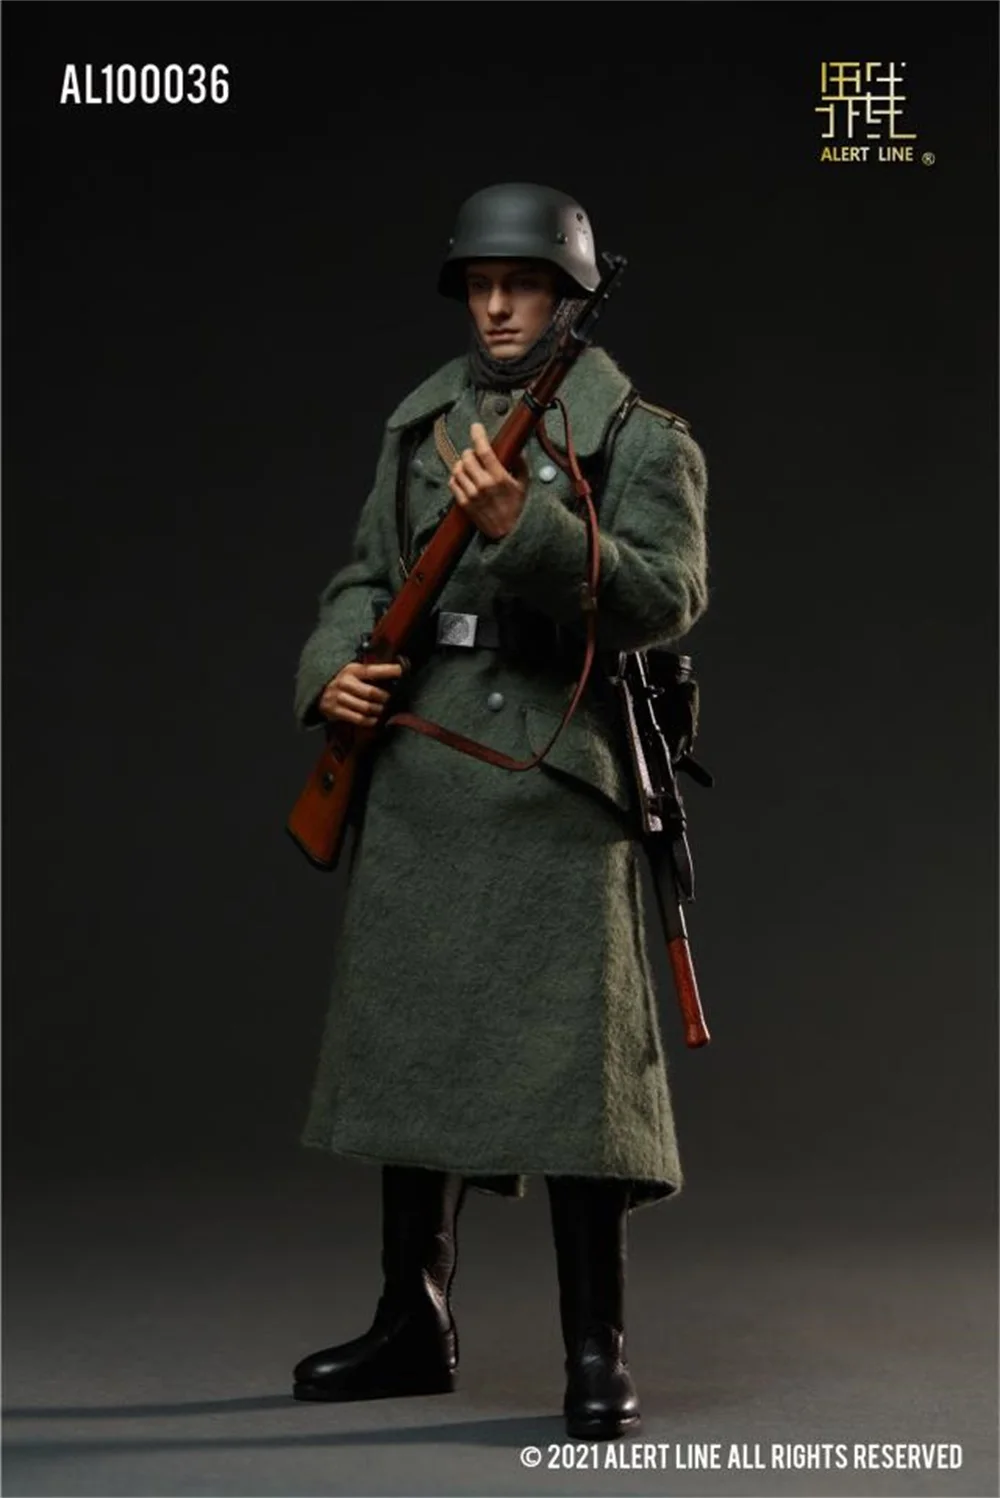 

1/6 Alert Line AL100036 WWII Army Soldier German Military Long Overcoat Shirt Model Fit 12inch Male Action Doll Collectable